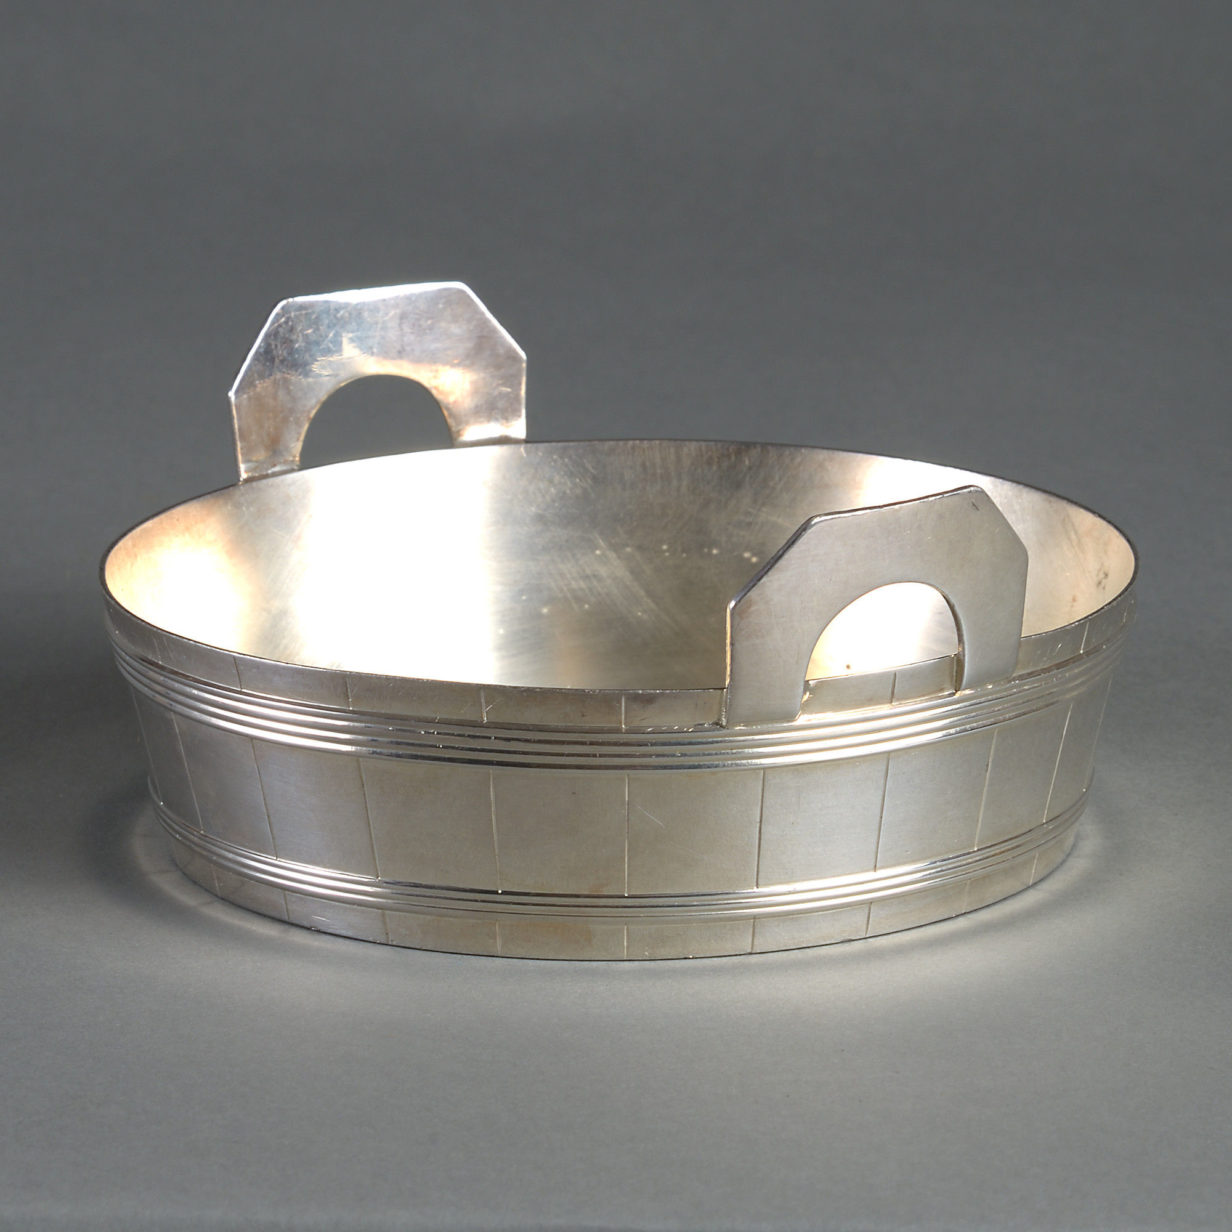 Early 20th century silvered butter dish